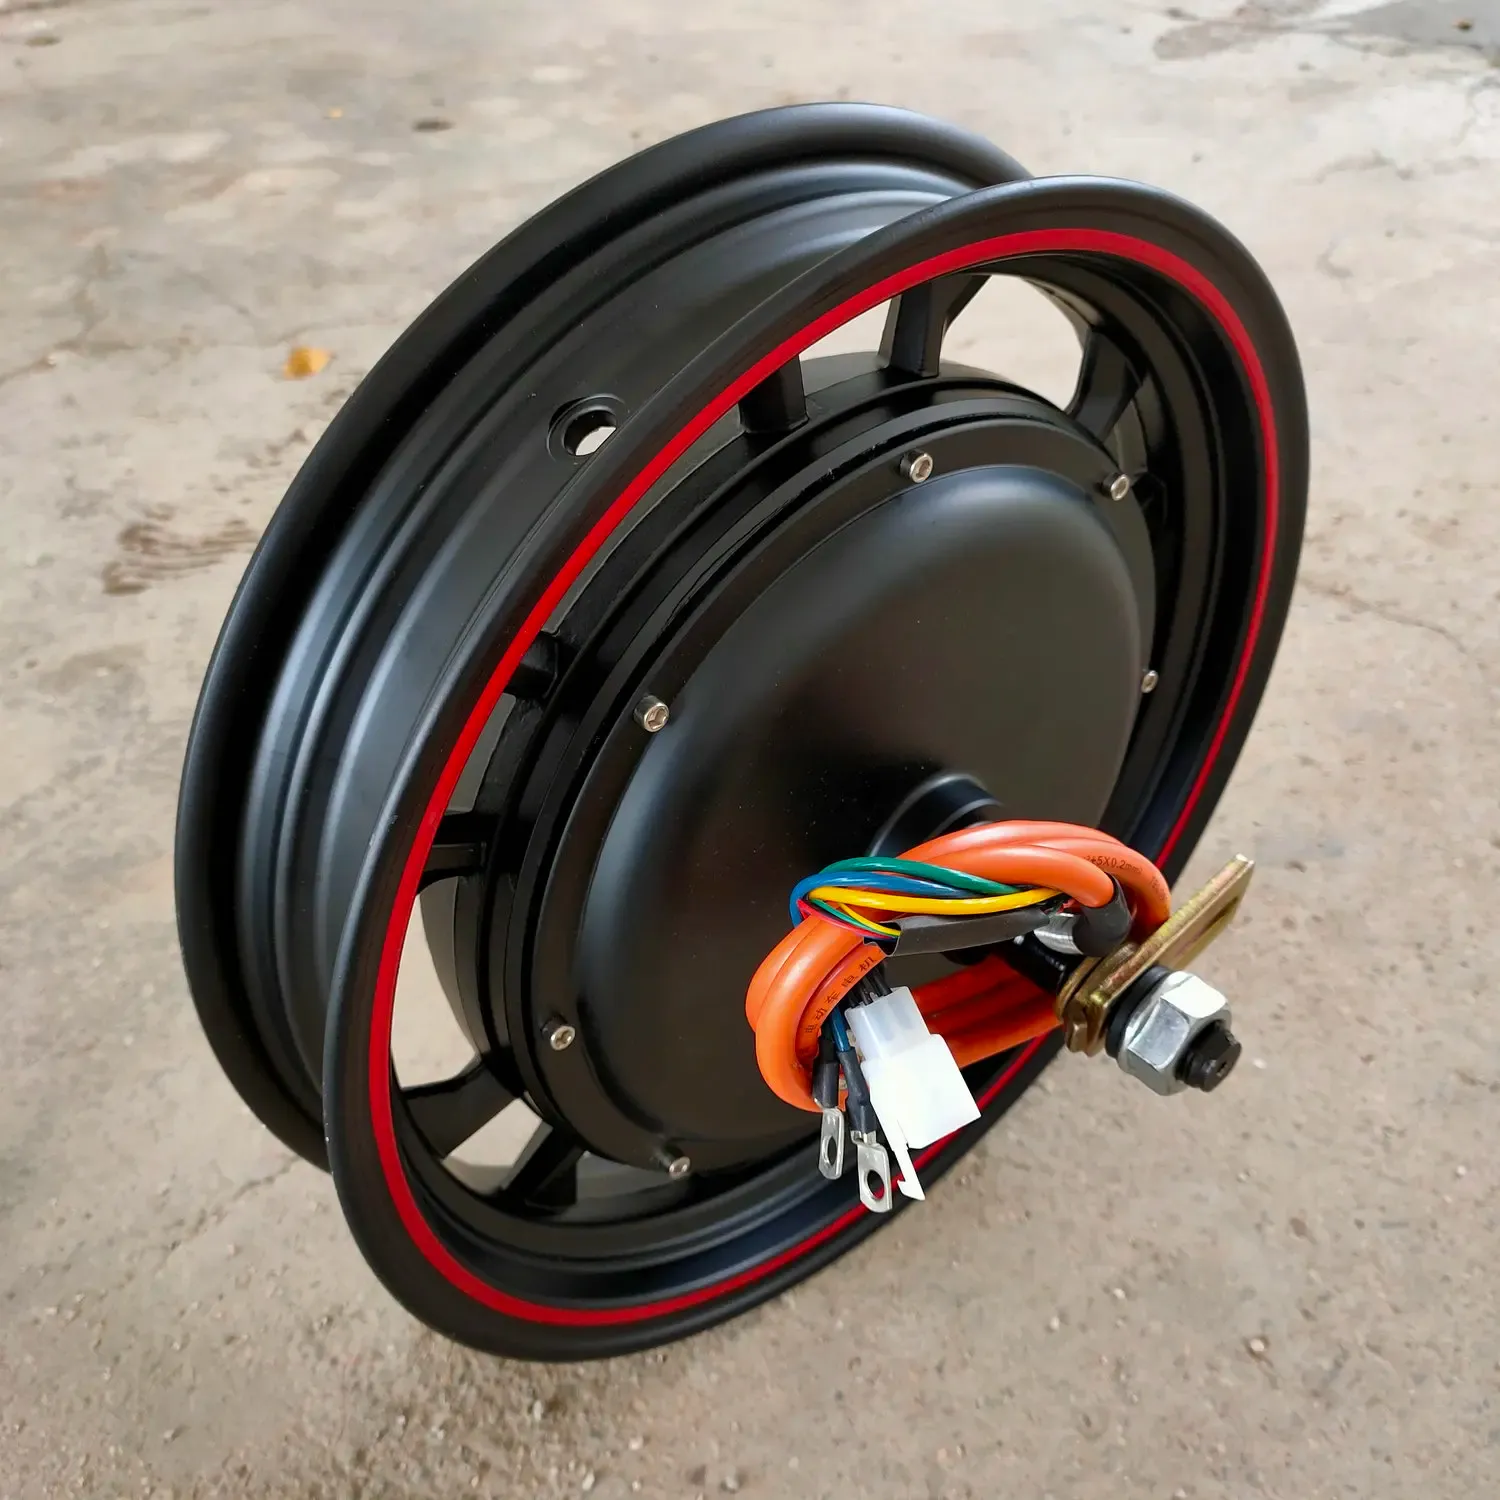 Part 16inch 48V60V72V1500W BLDC MOTOR FOR ELECTRIC BIKE TRICYCLE SCOOTER CONVERSION PARTS 3HOLES DISC BRAKE NEED FORK OPENING 200MM